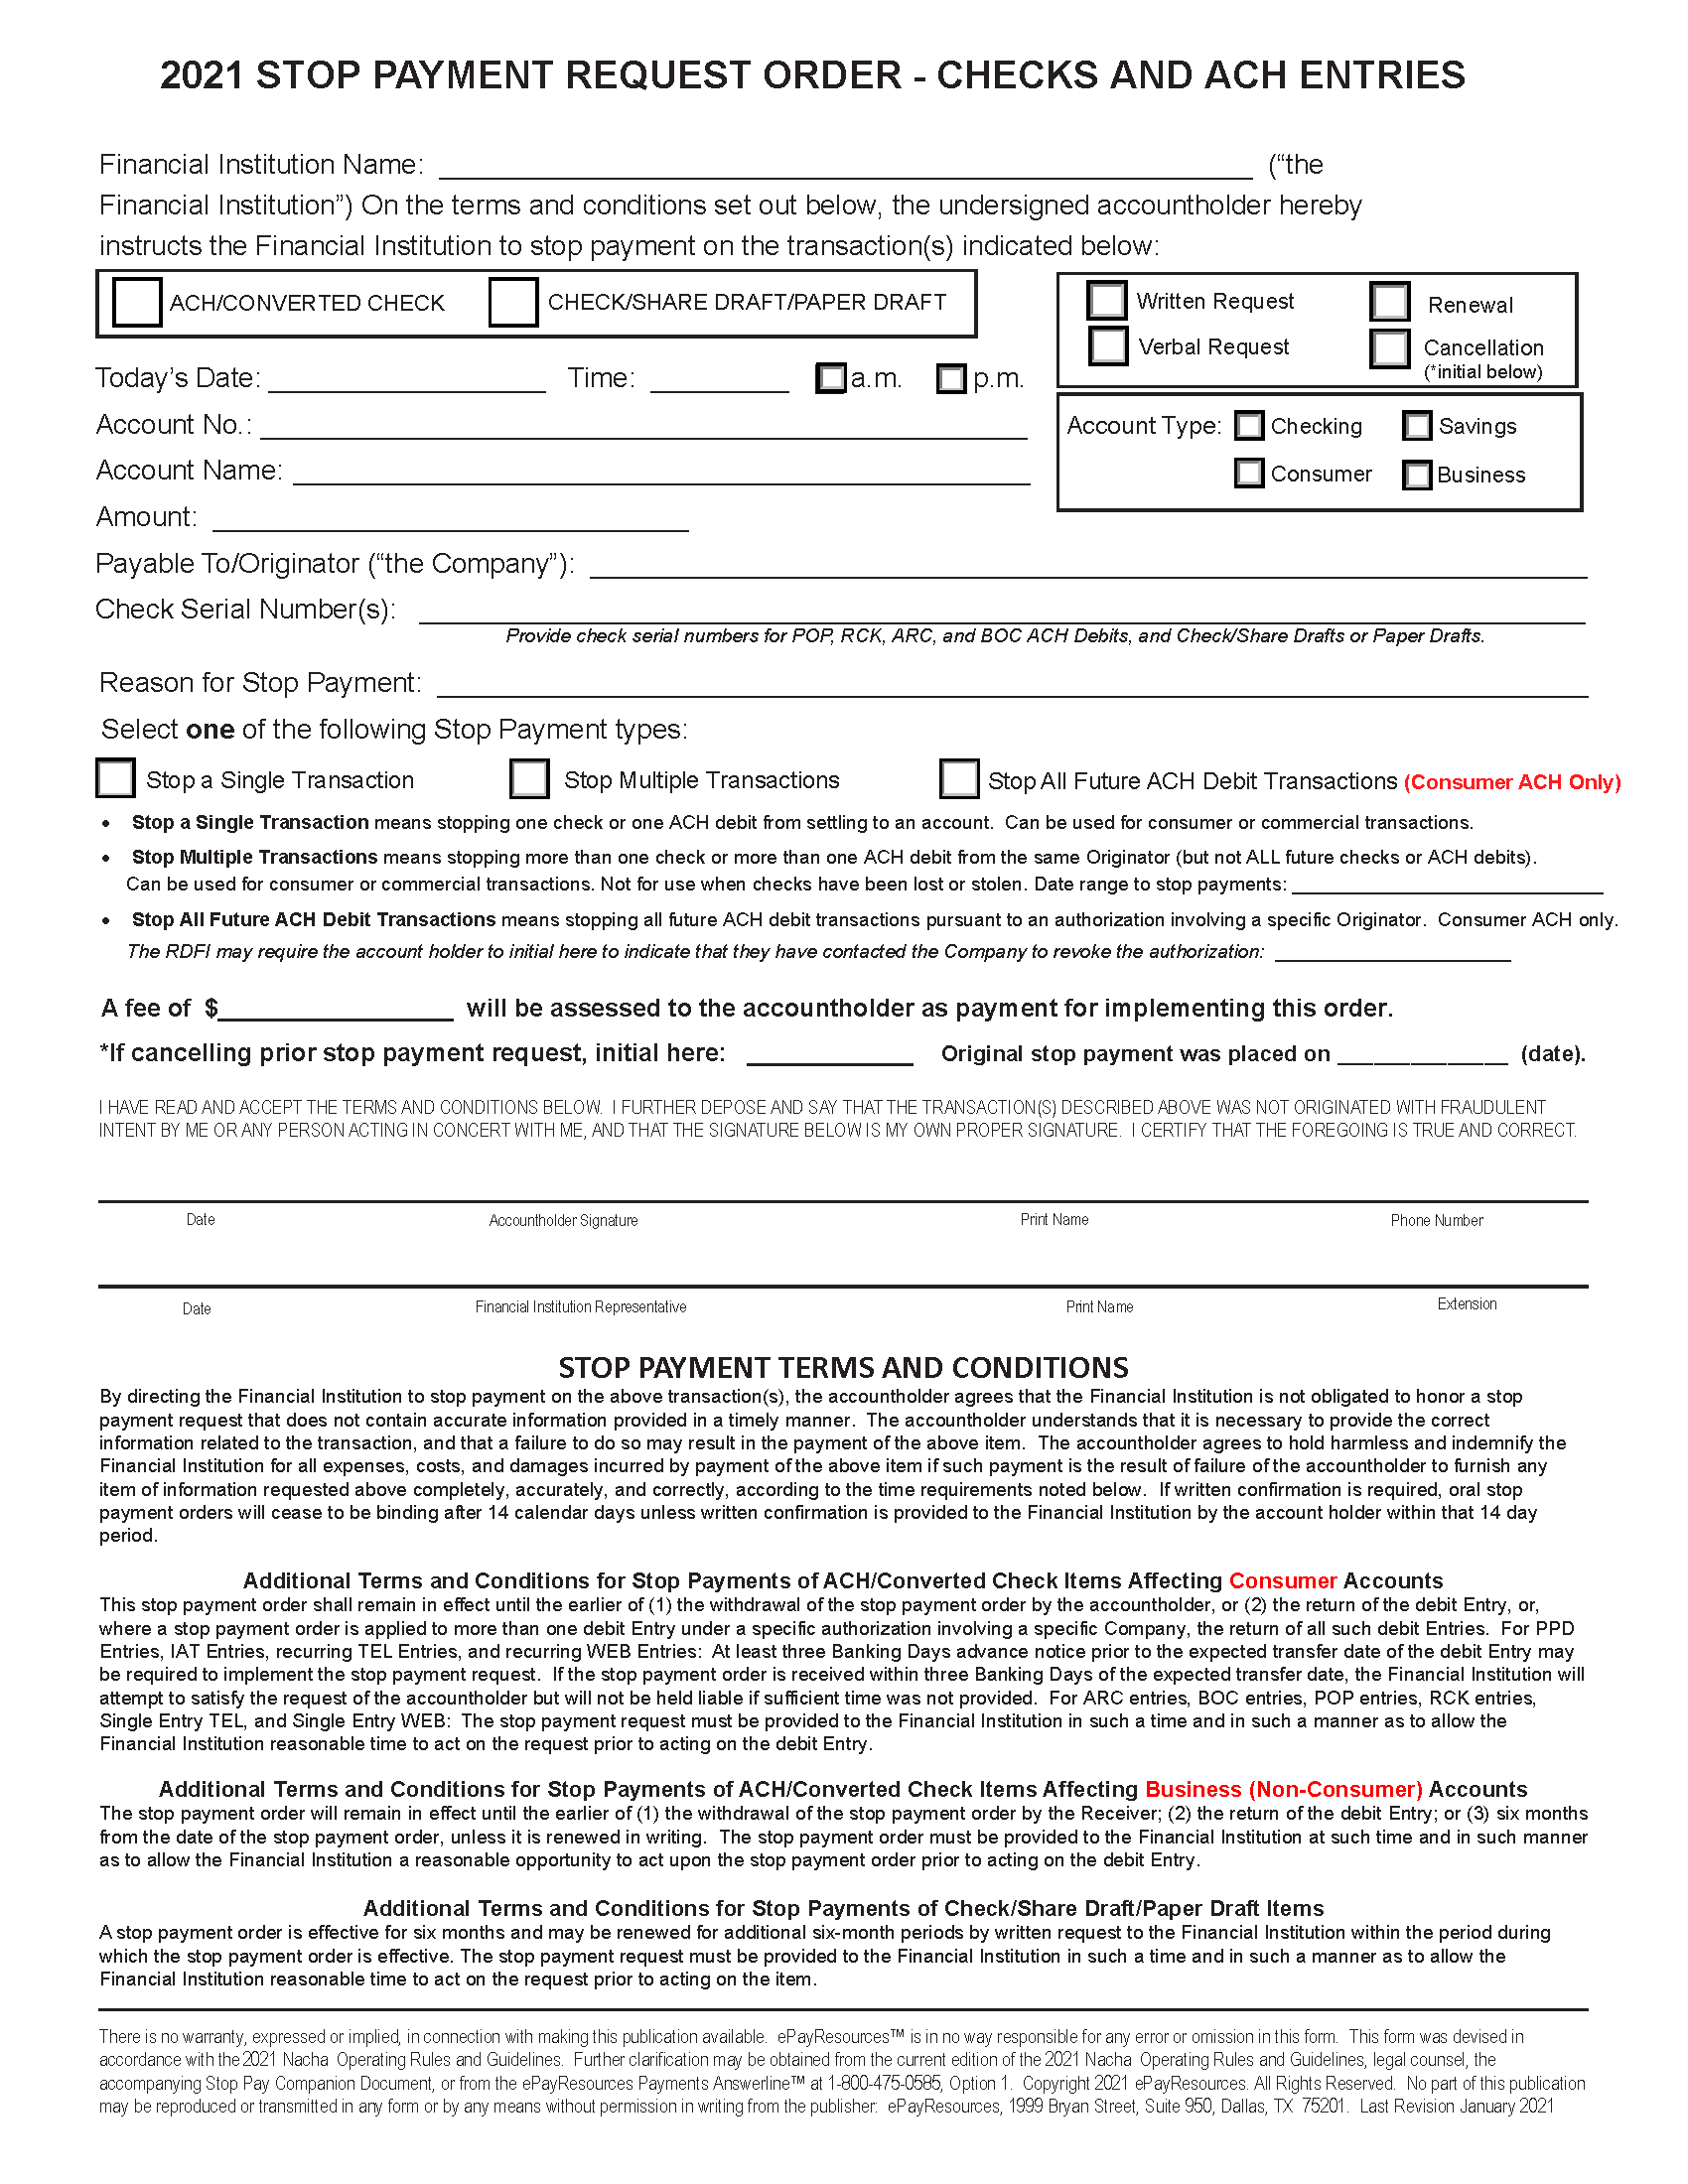 Customized Electronic Stop Payment Request Form